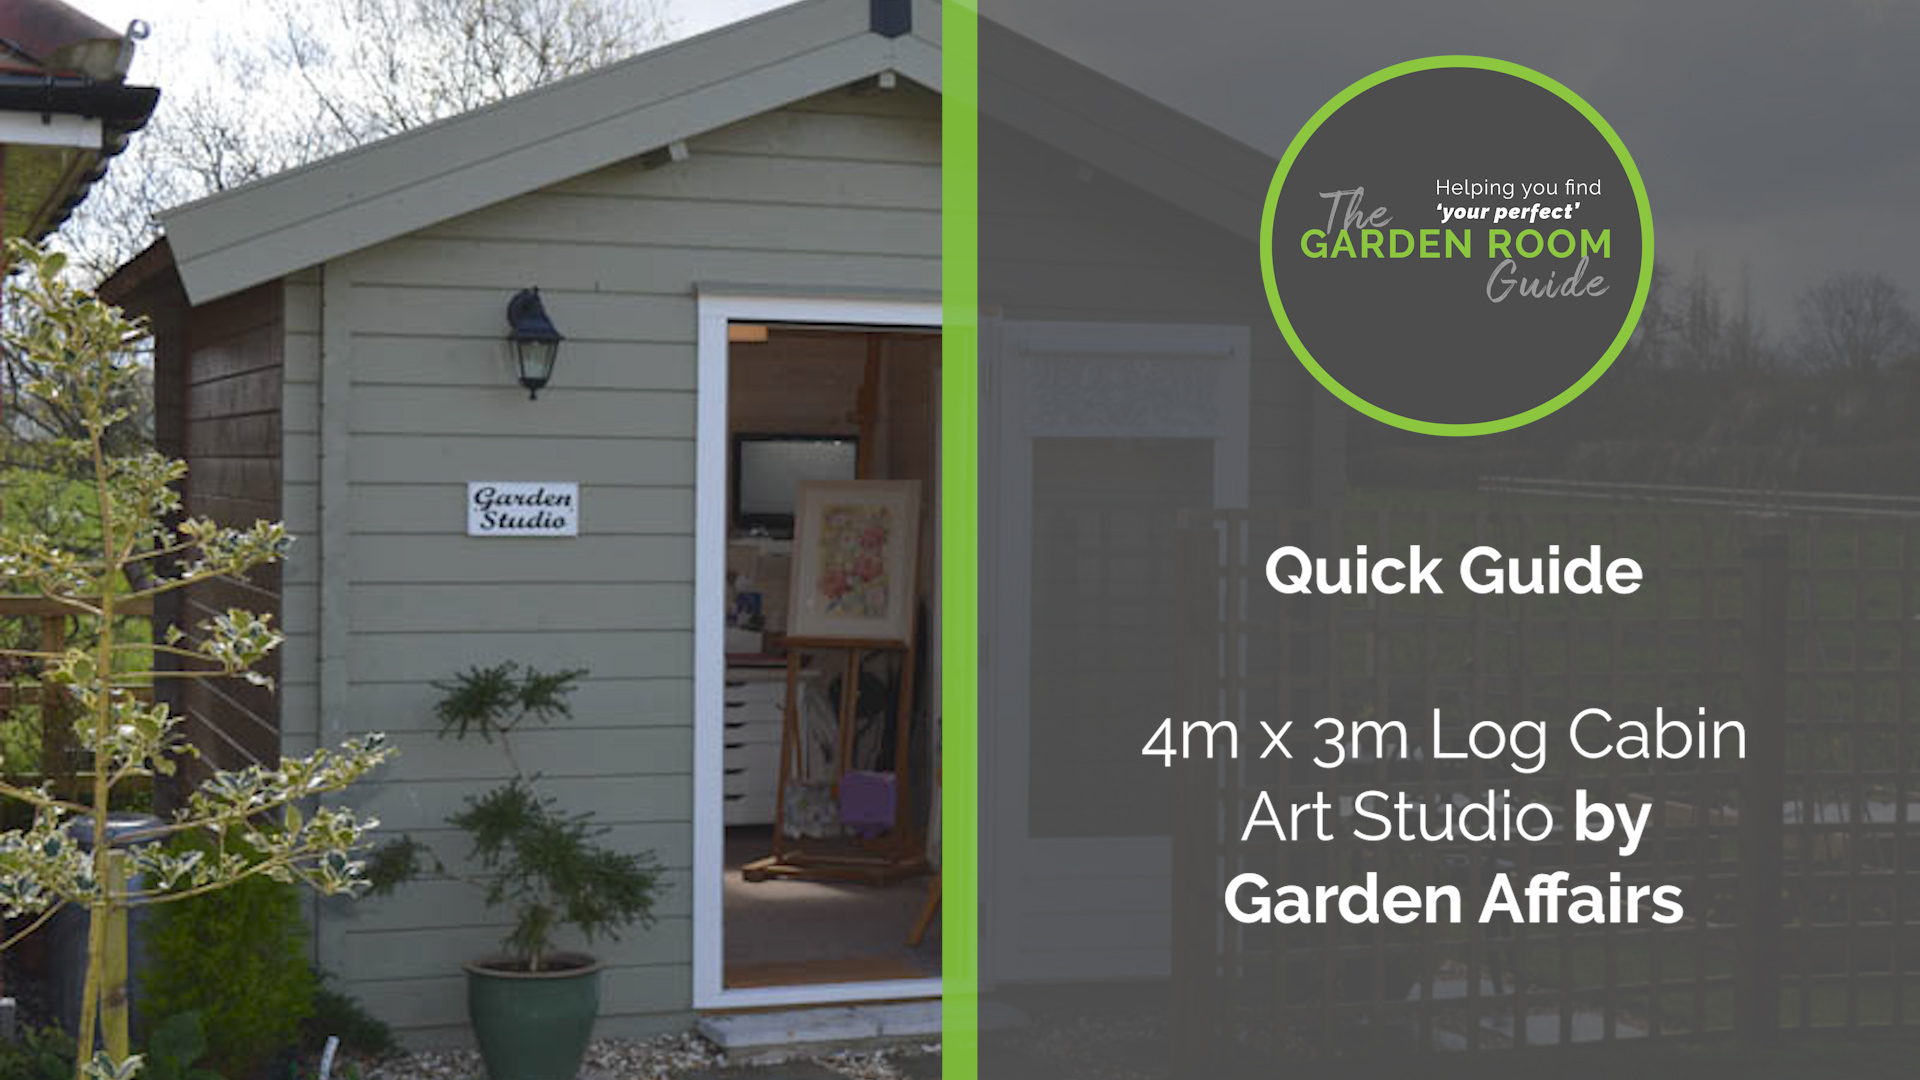 Quick look at a 4m x 3m log cabin art studio by Garden Affairs